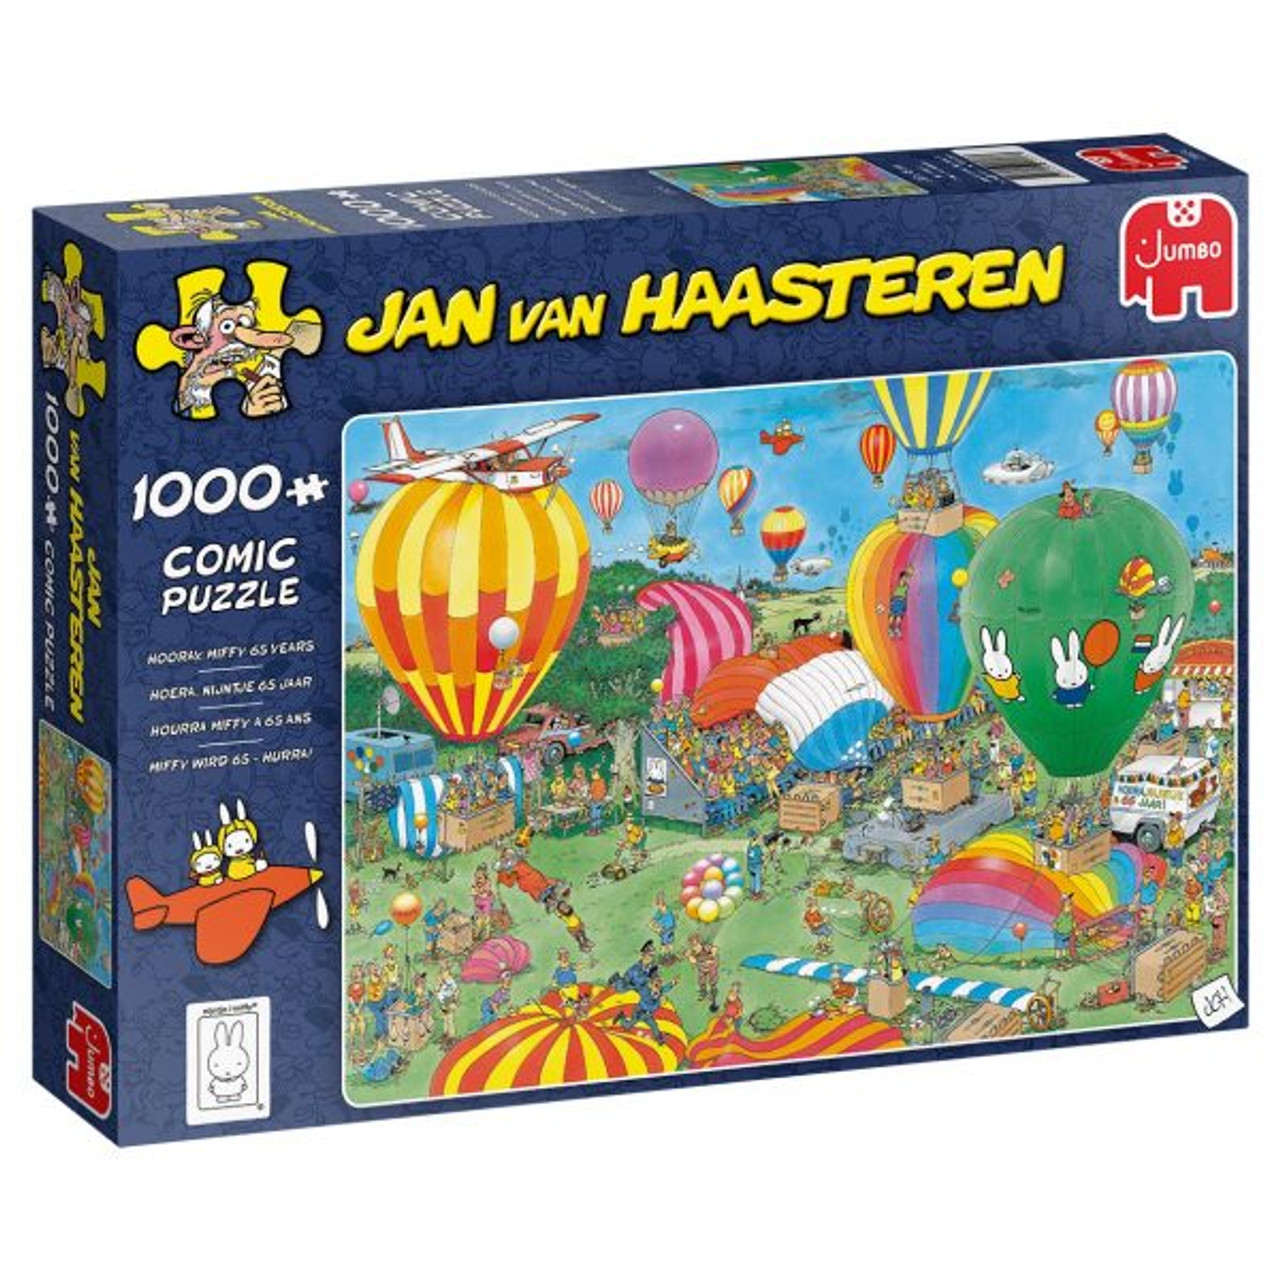 fontein defect Vrijwillig Hooray Miffy 65" JVH 1000 Piece Jigsaw Puzzle | Jumbo - Tri-M Specialty  Products